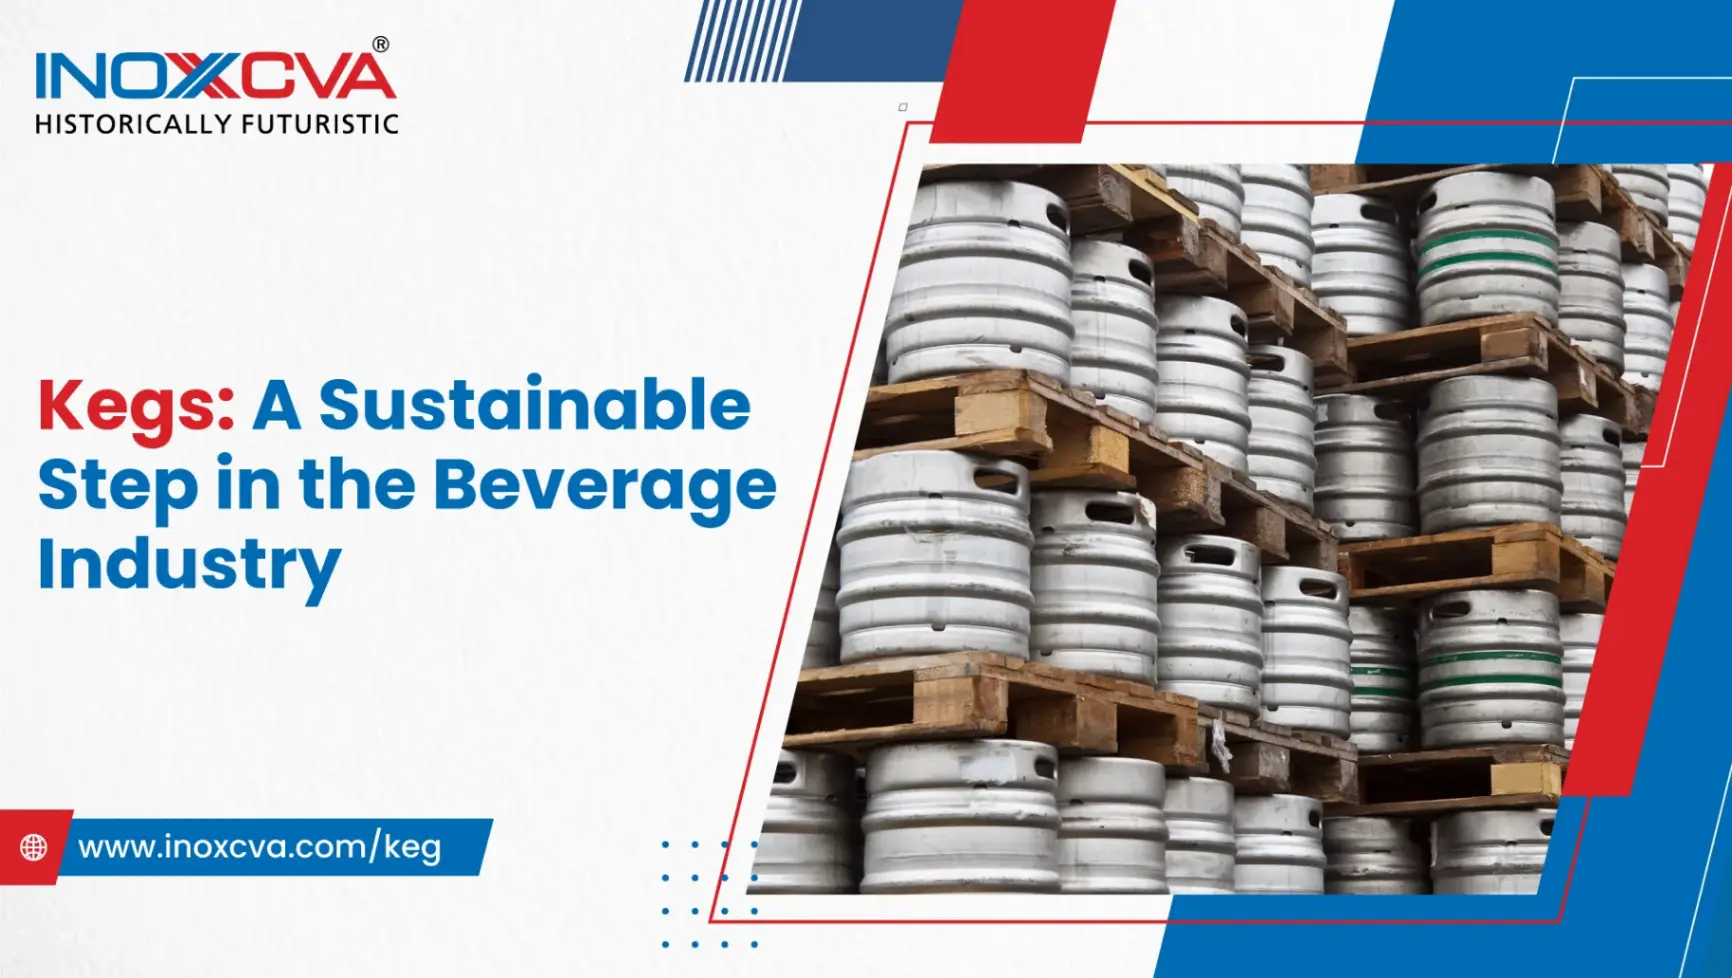 Kegs A Sustainable Step in the Beverage Industry and Its Benefits